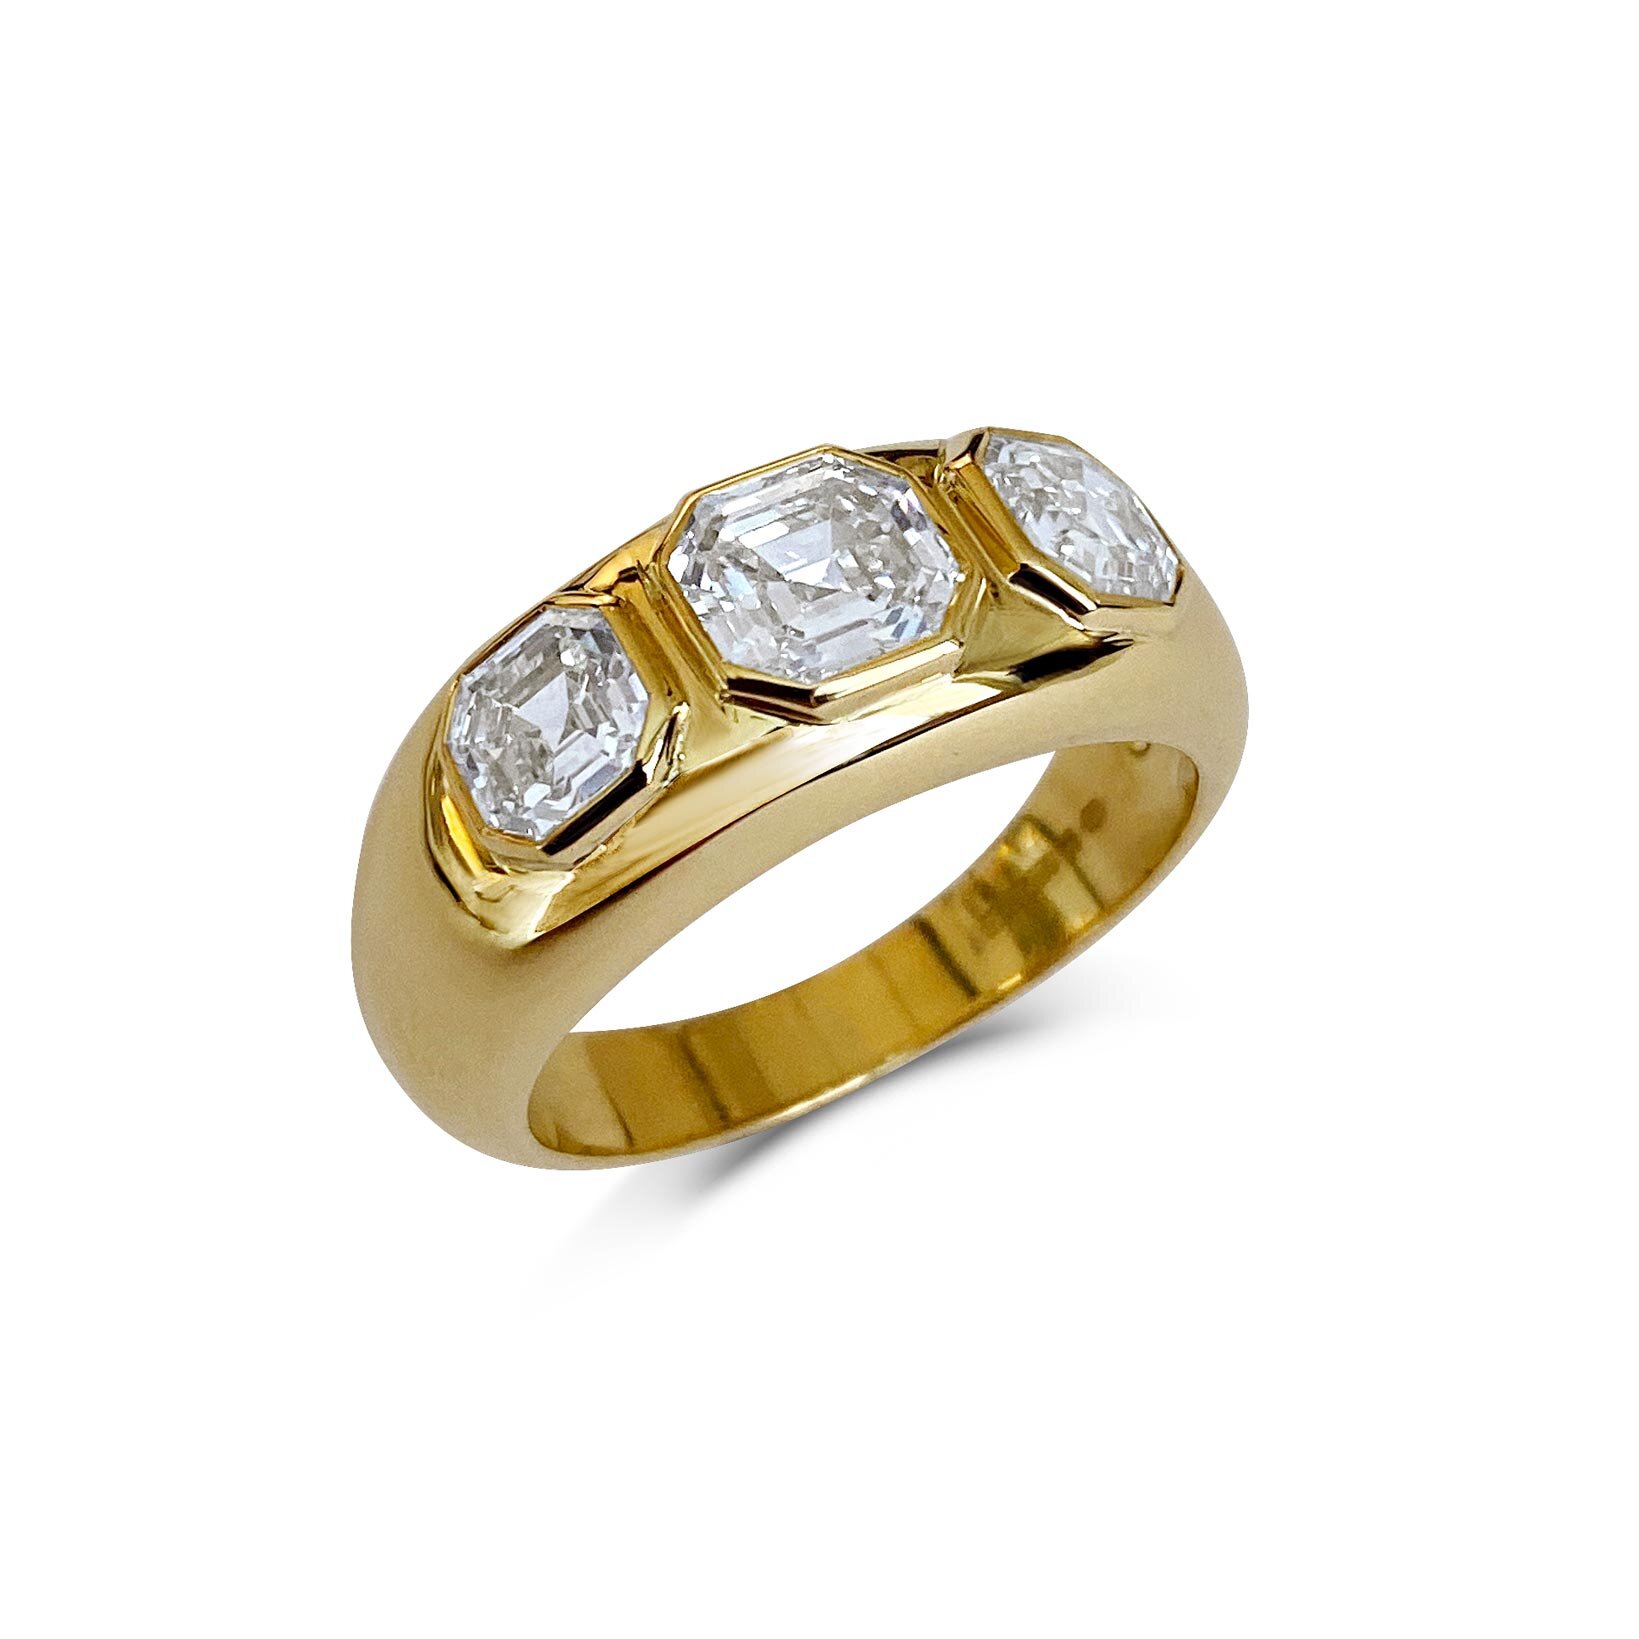 Three-stone Asscher-cut diamond gypsy ring mounted in 18ct yellow gold